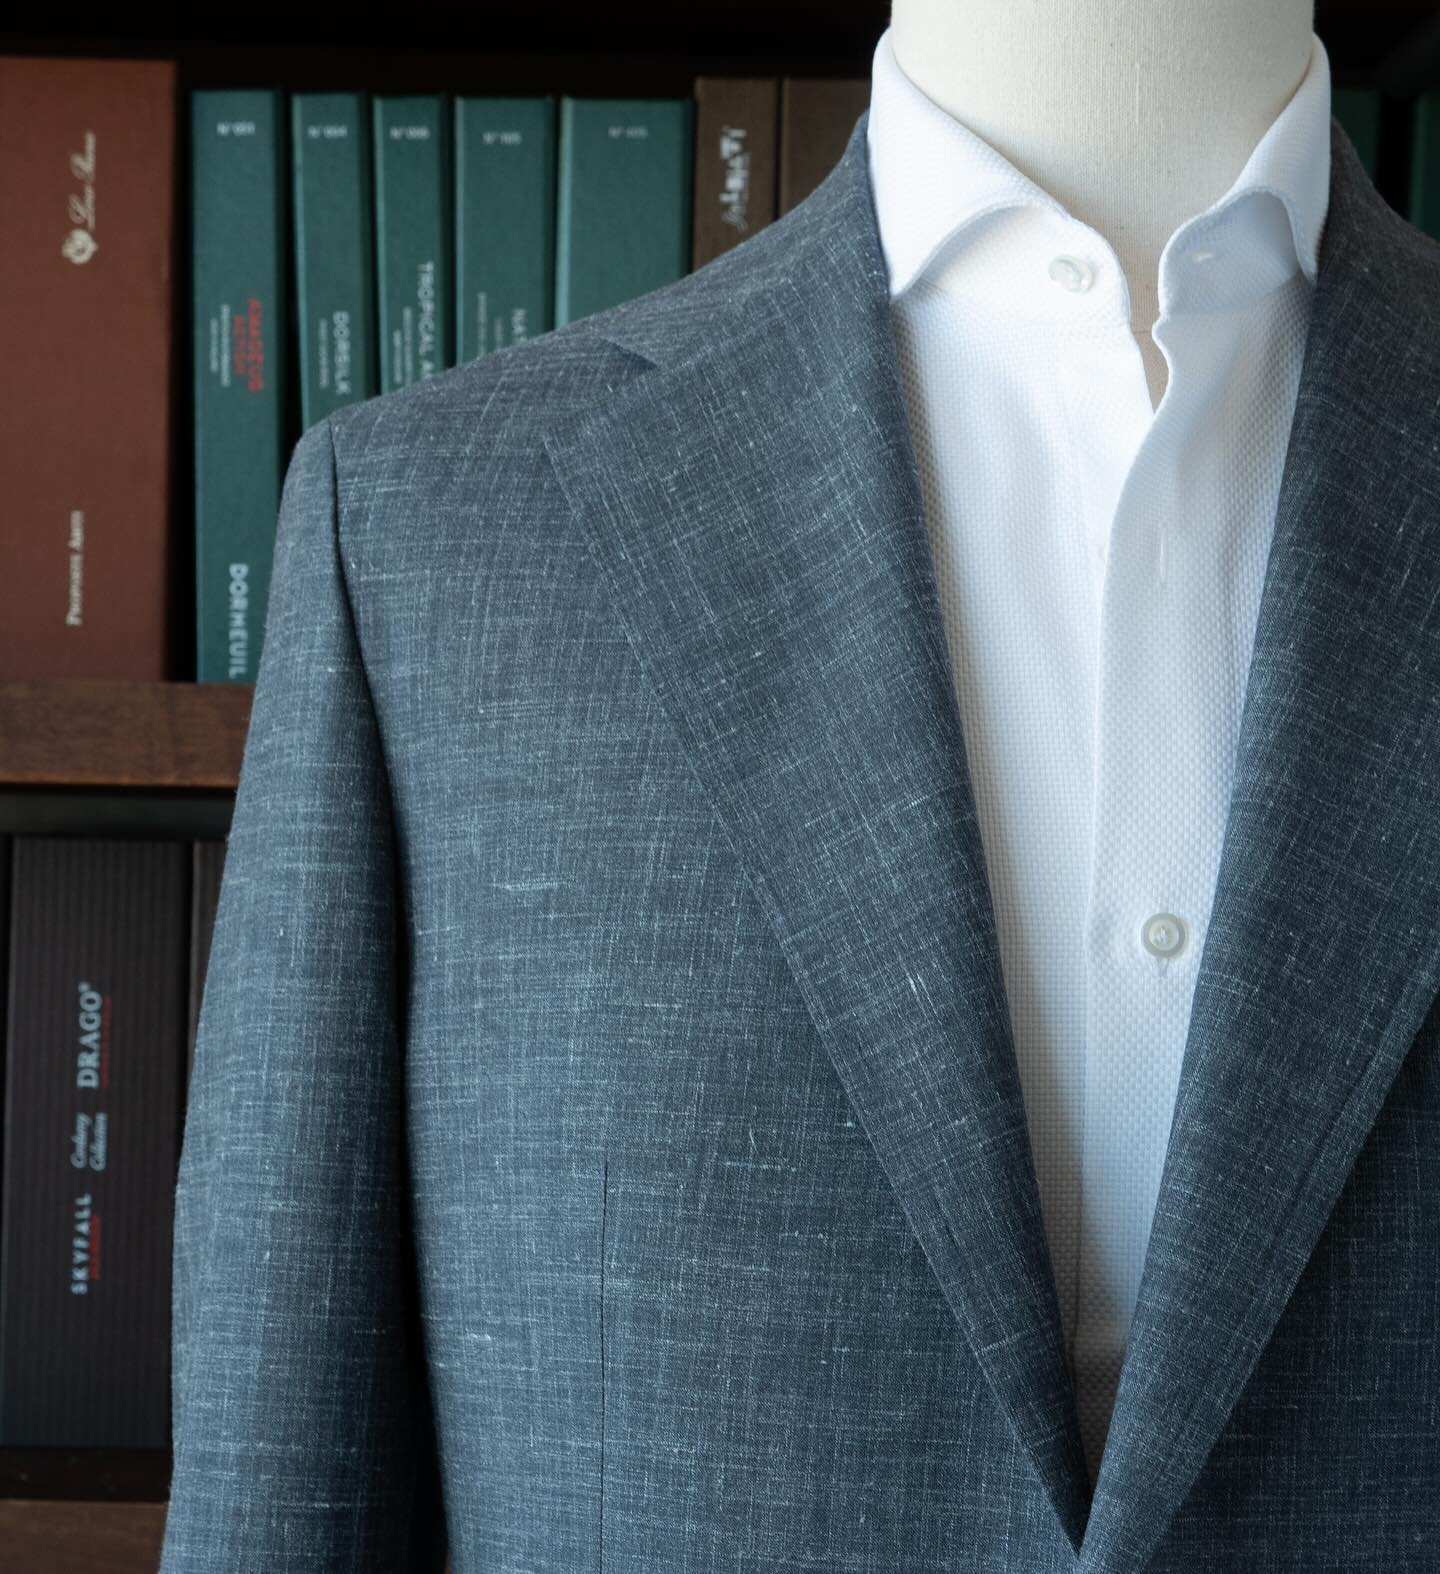 Classic shades of summer suiting! Wool, silk, linen @lanificiorogna cloth with our handmade in Napoli dress shirt. 

#menswear #mensstyle #mensfashion #fashion #mensoutfit #sartorial #suitup